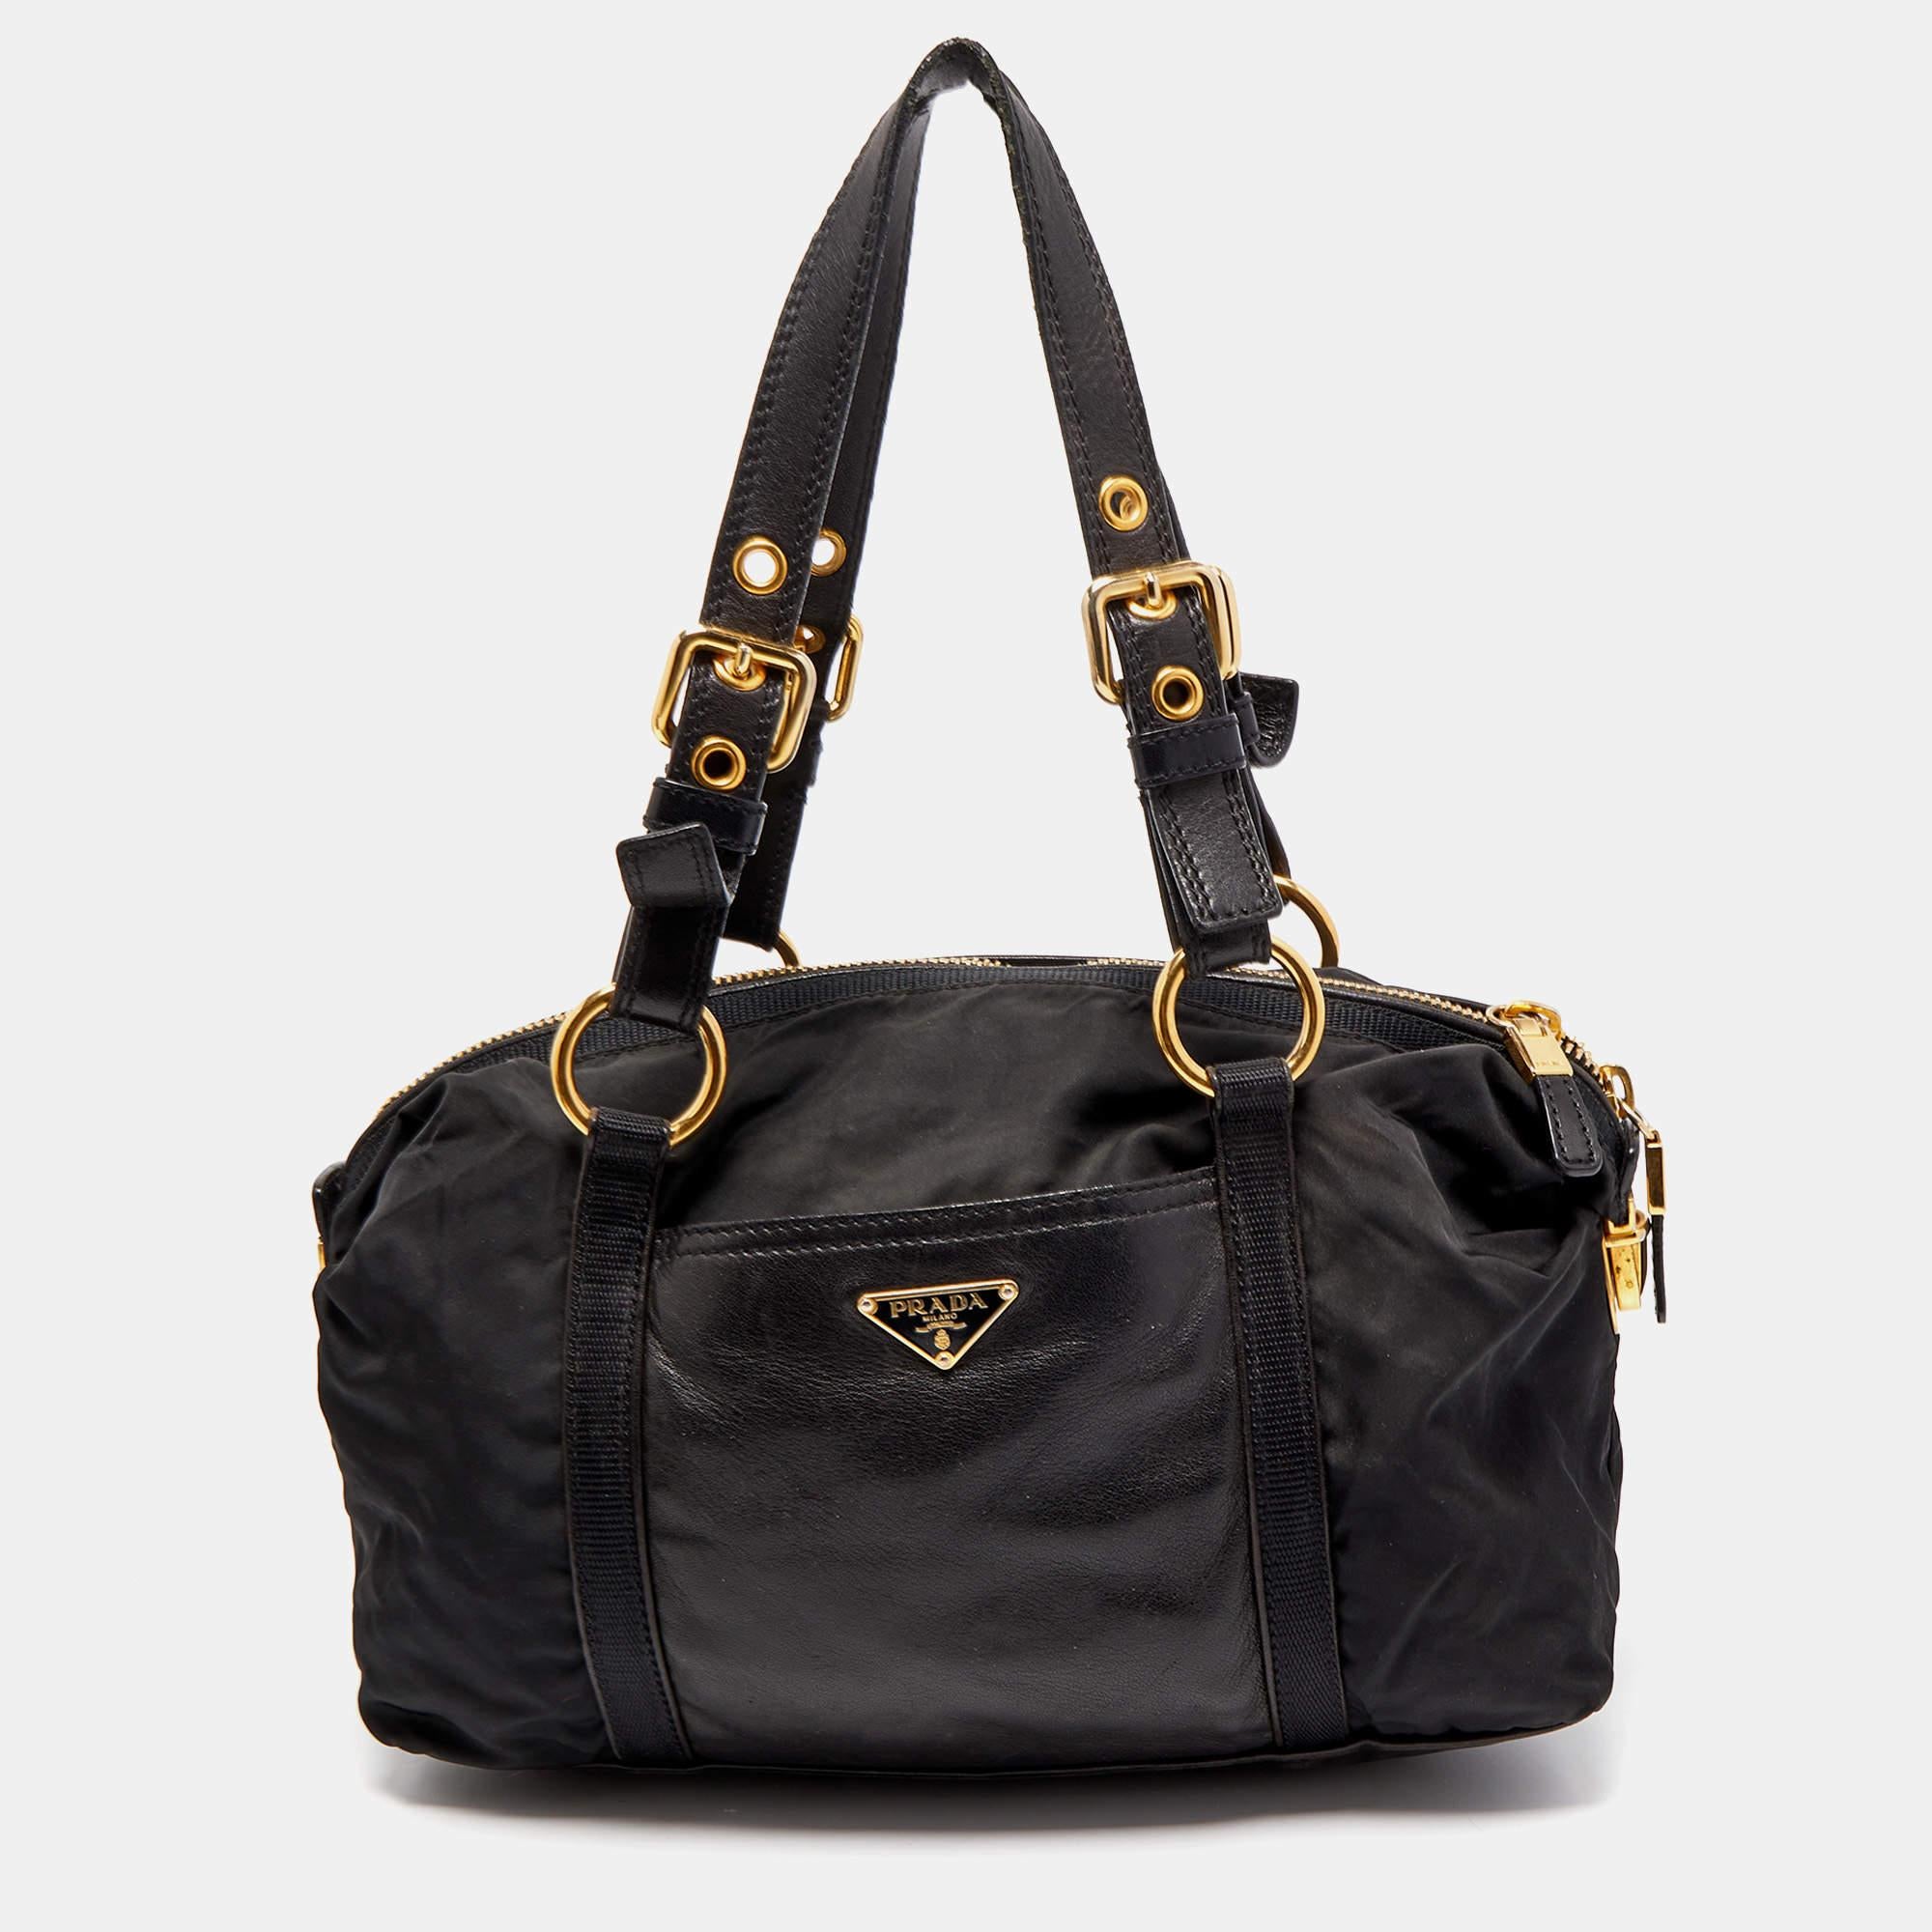 Elevate your style and have your essentials with you as you carry this authentic Prada bag. Crafted using leather & nylon, the bag has two handles, a pocket detail on the front, and a nylon-lined interior.

Includes: Info Booklet, Authenticity Card
